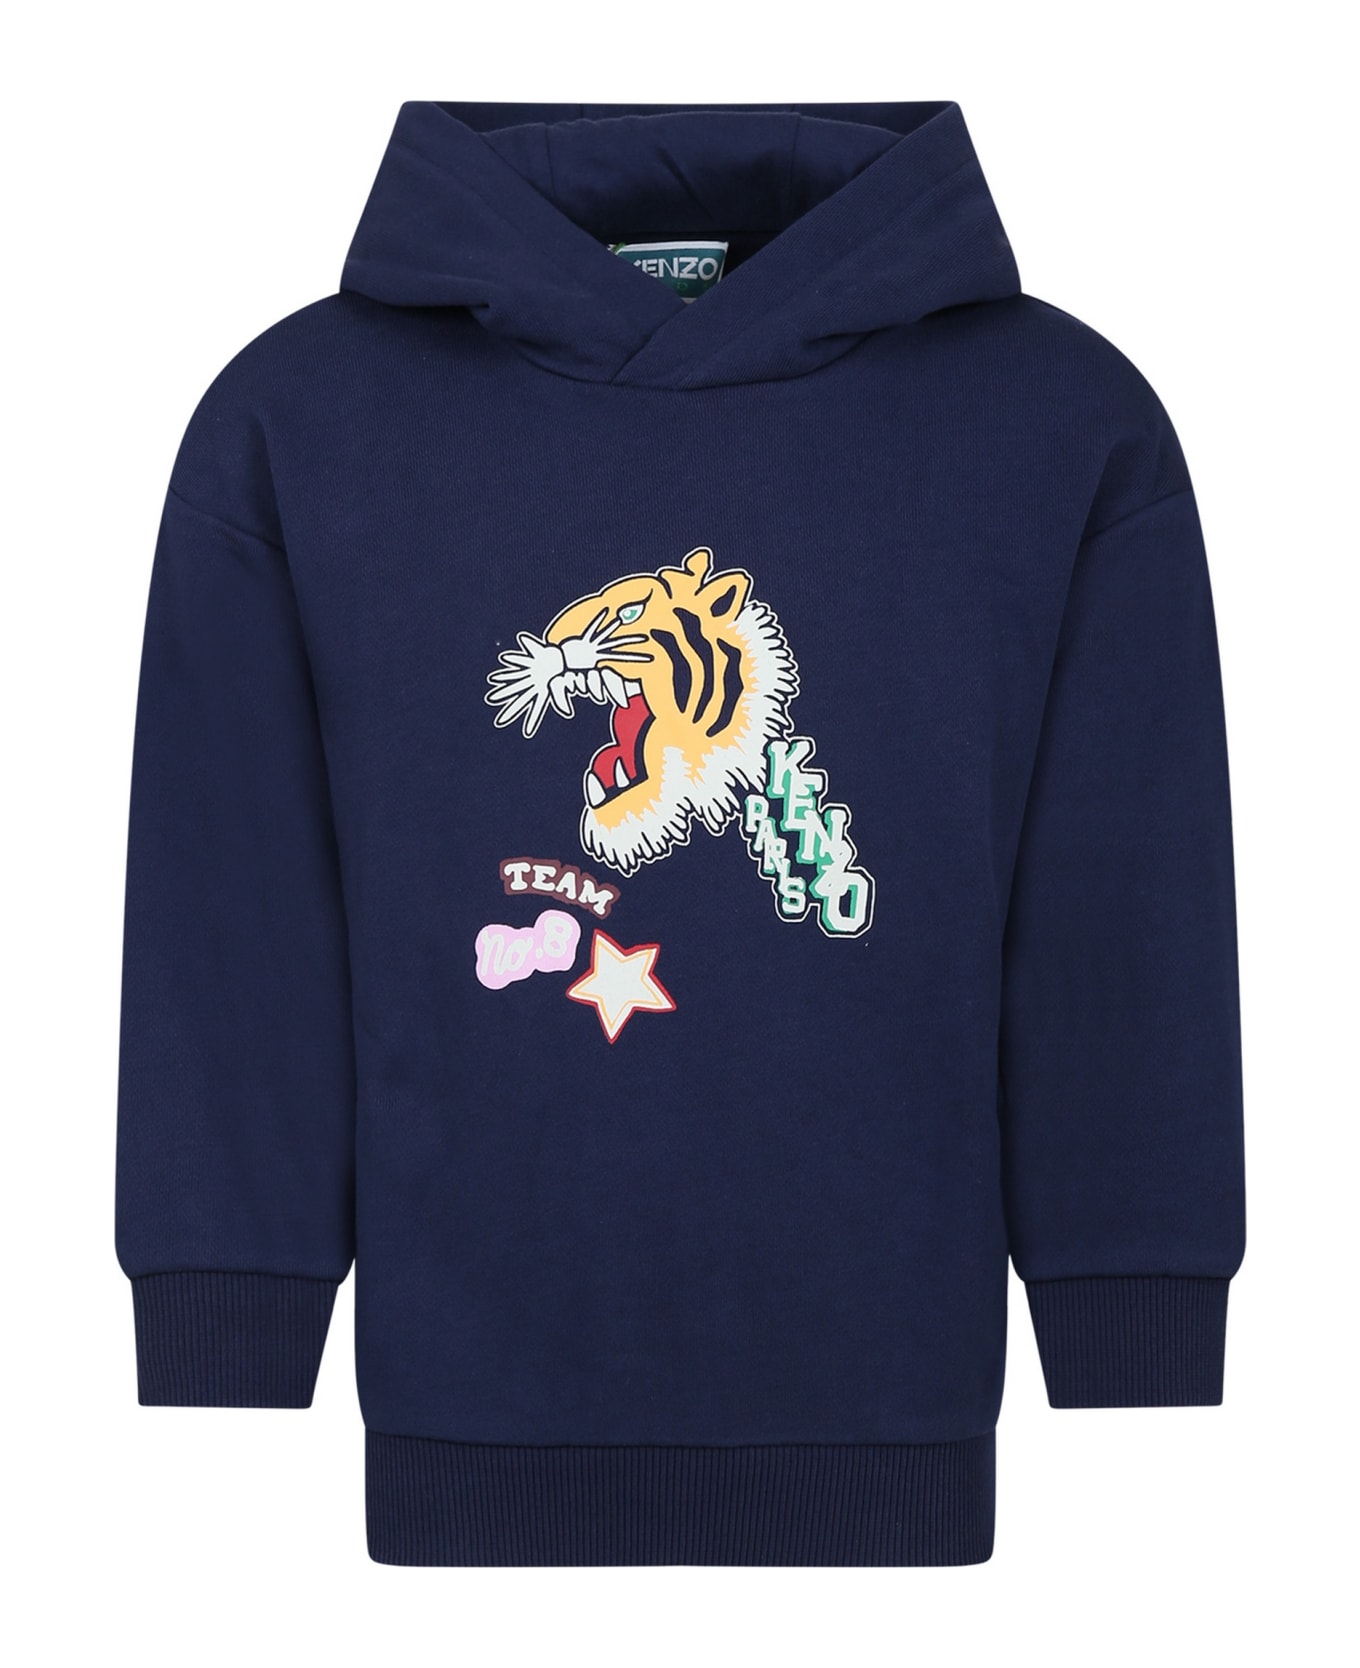 Kenzo Kids Blue Sweatshirt For Girl With Tiger And Logo - A Marine